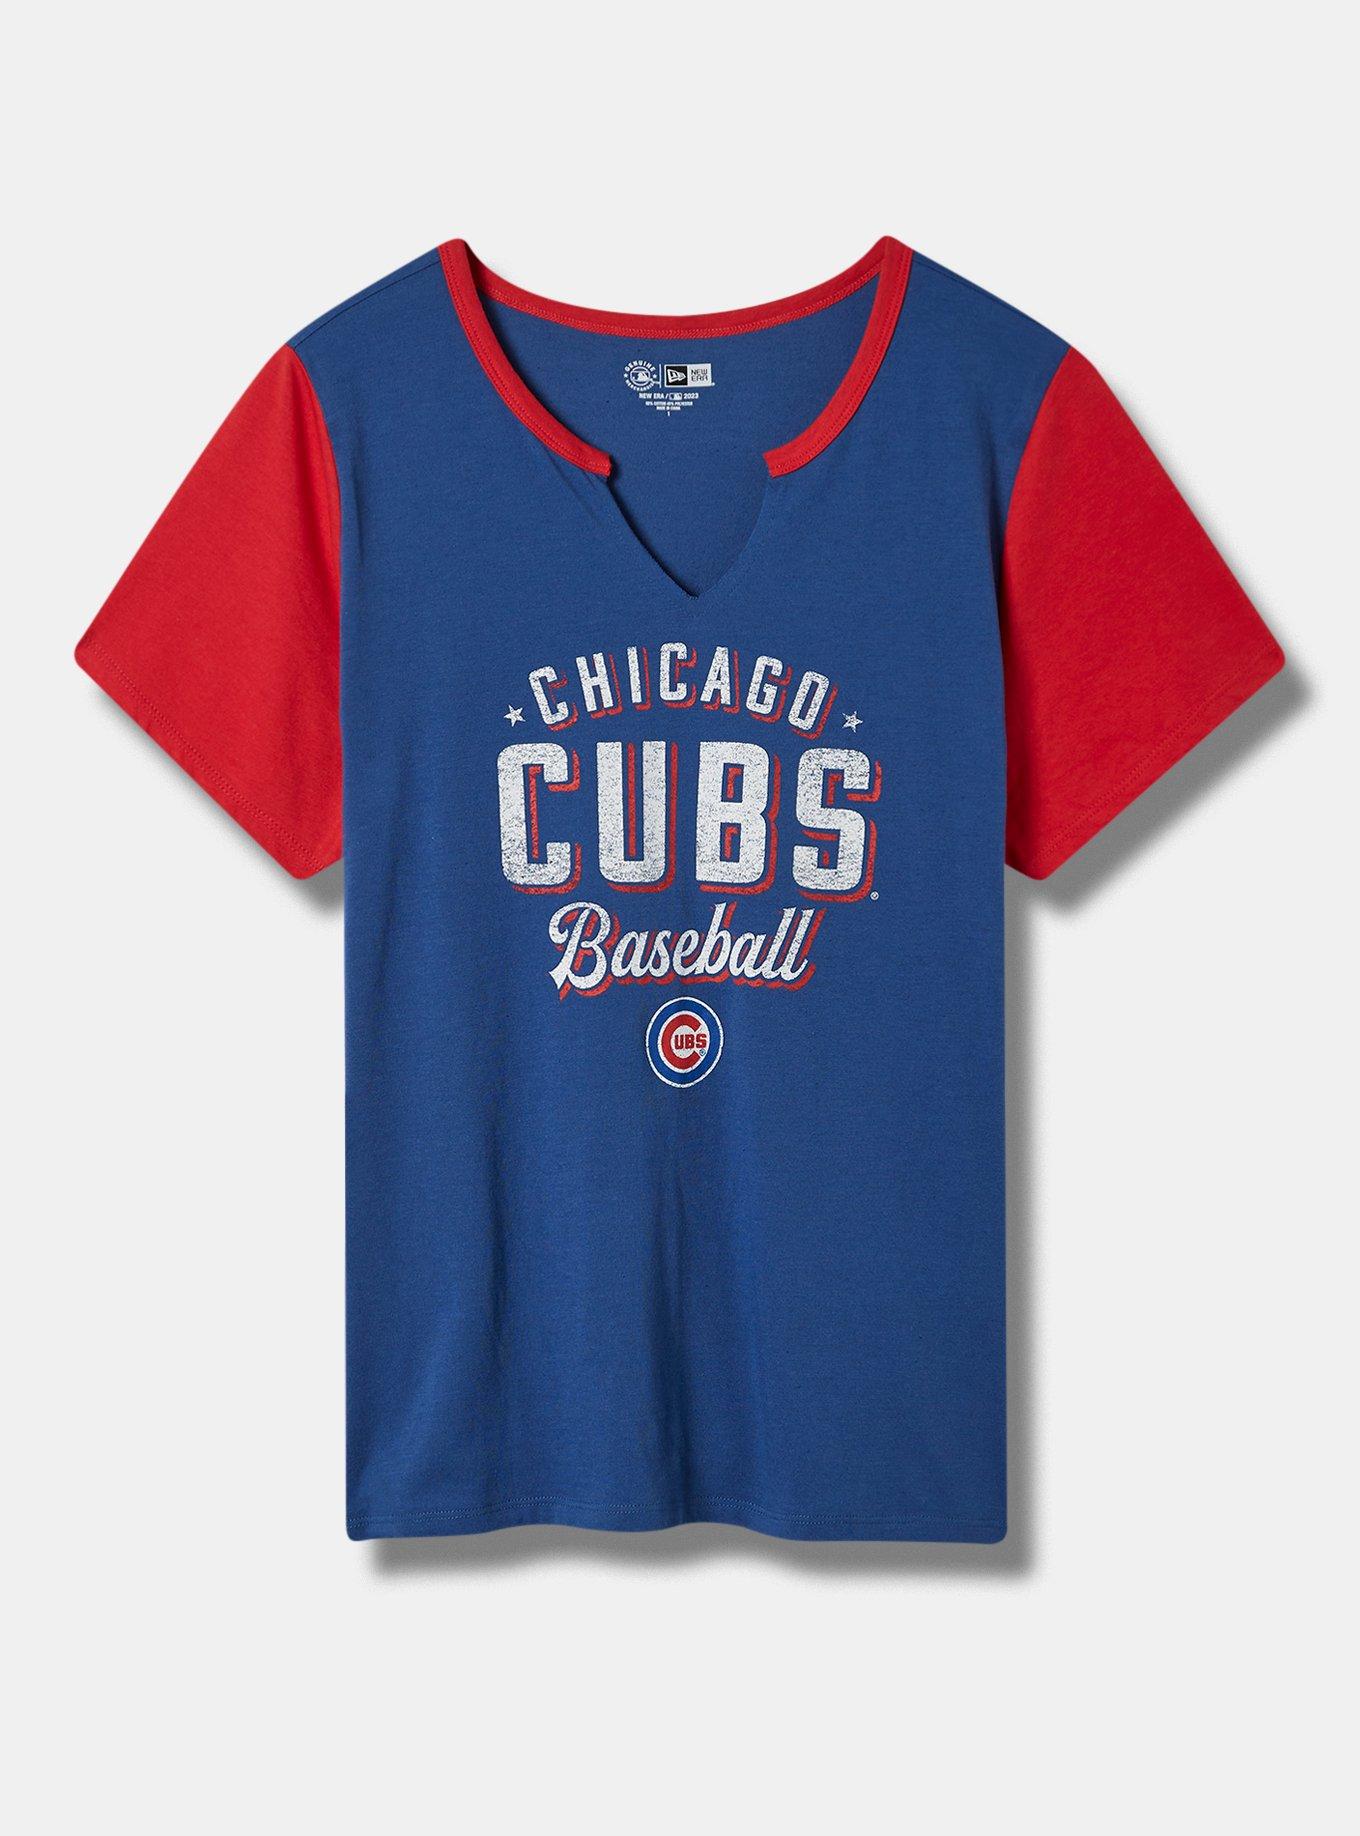 Boys Chicago Cubs MLB Jerseys for sale